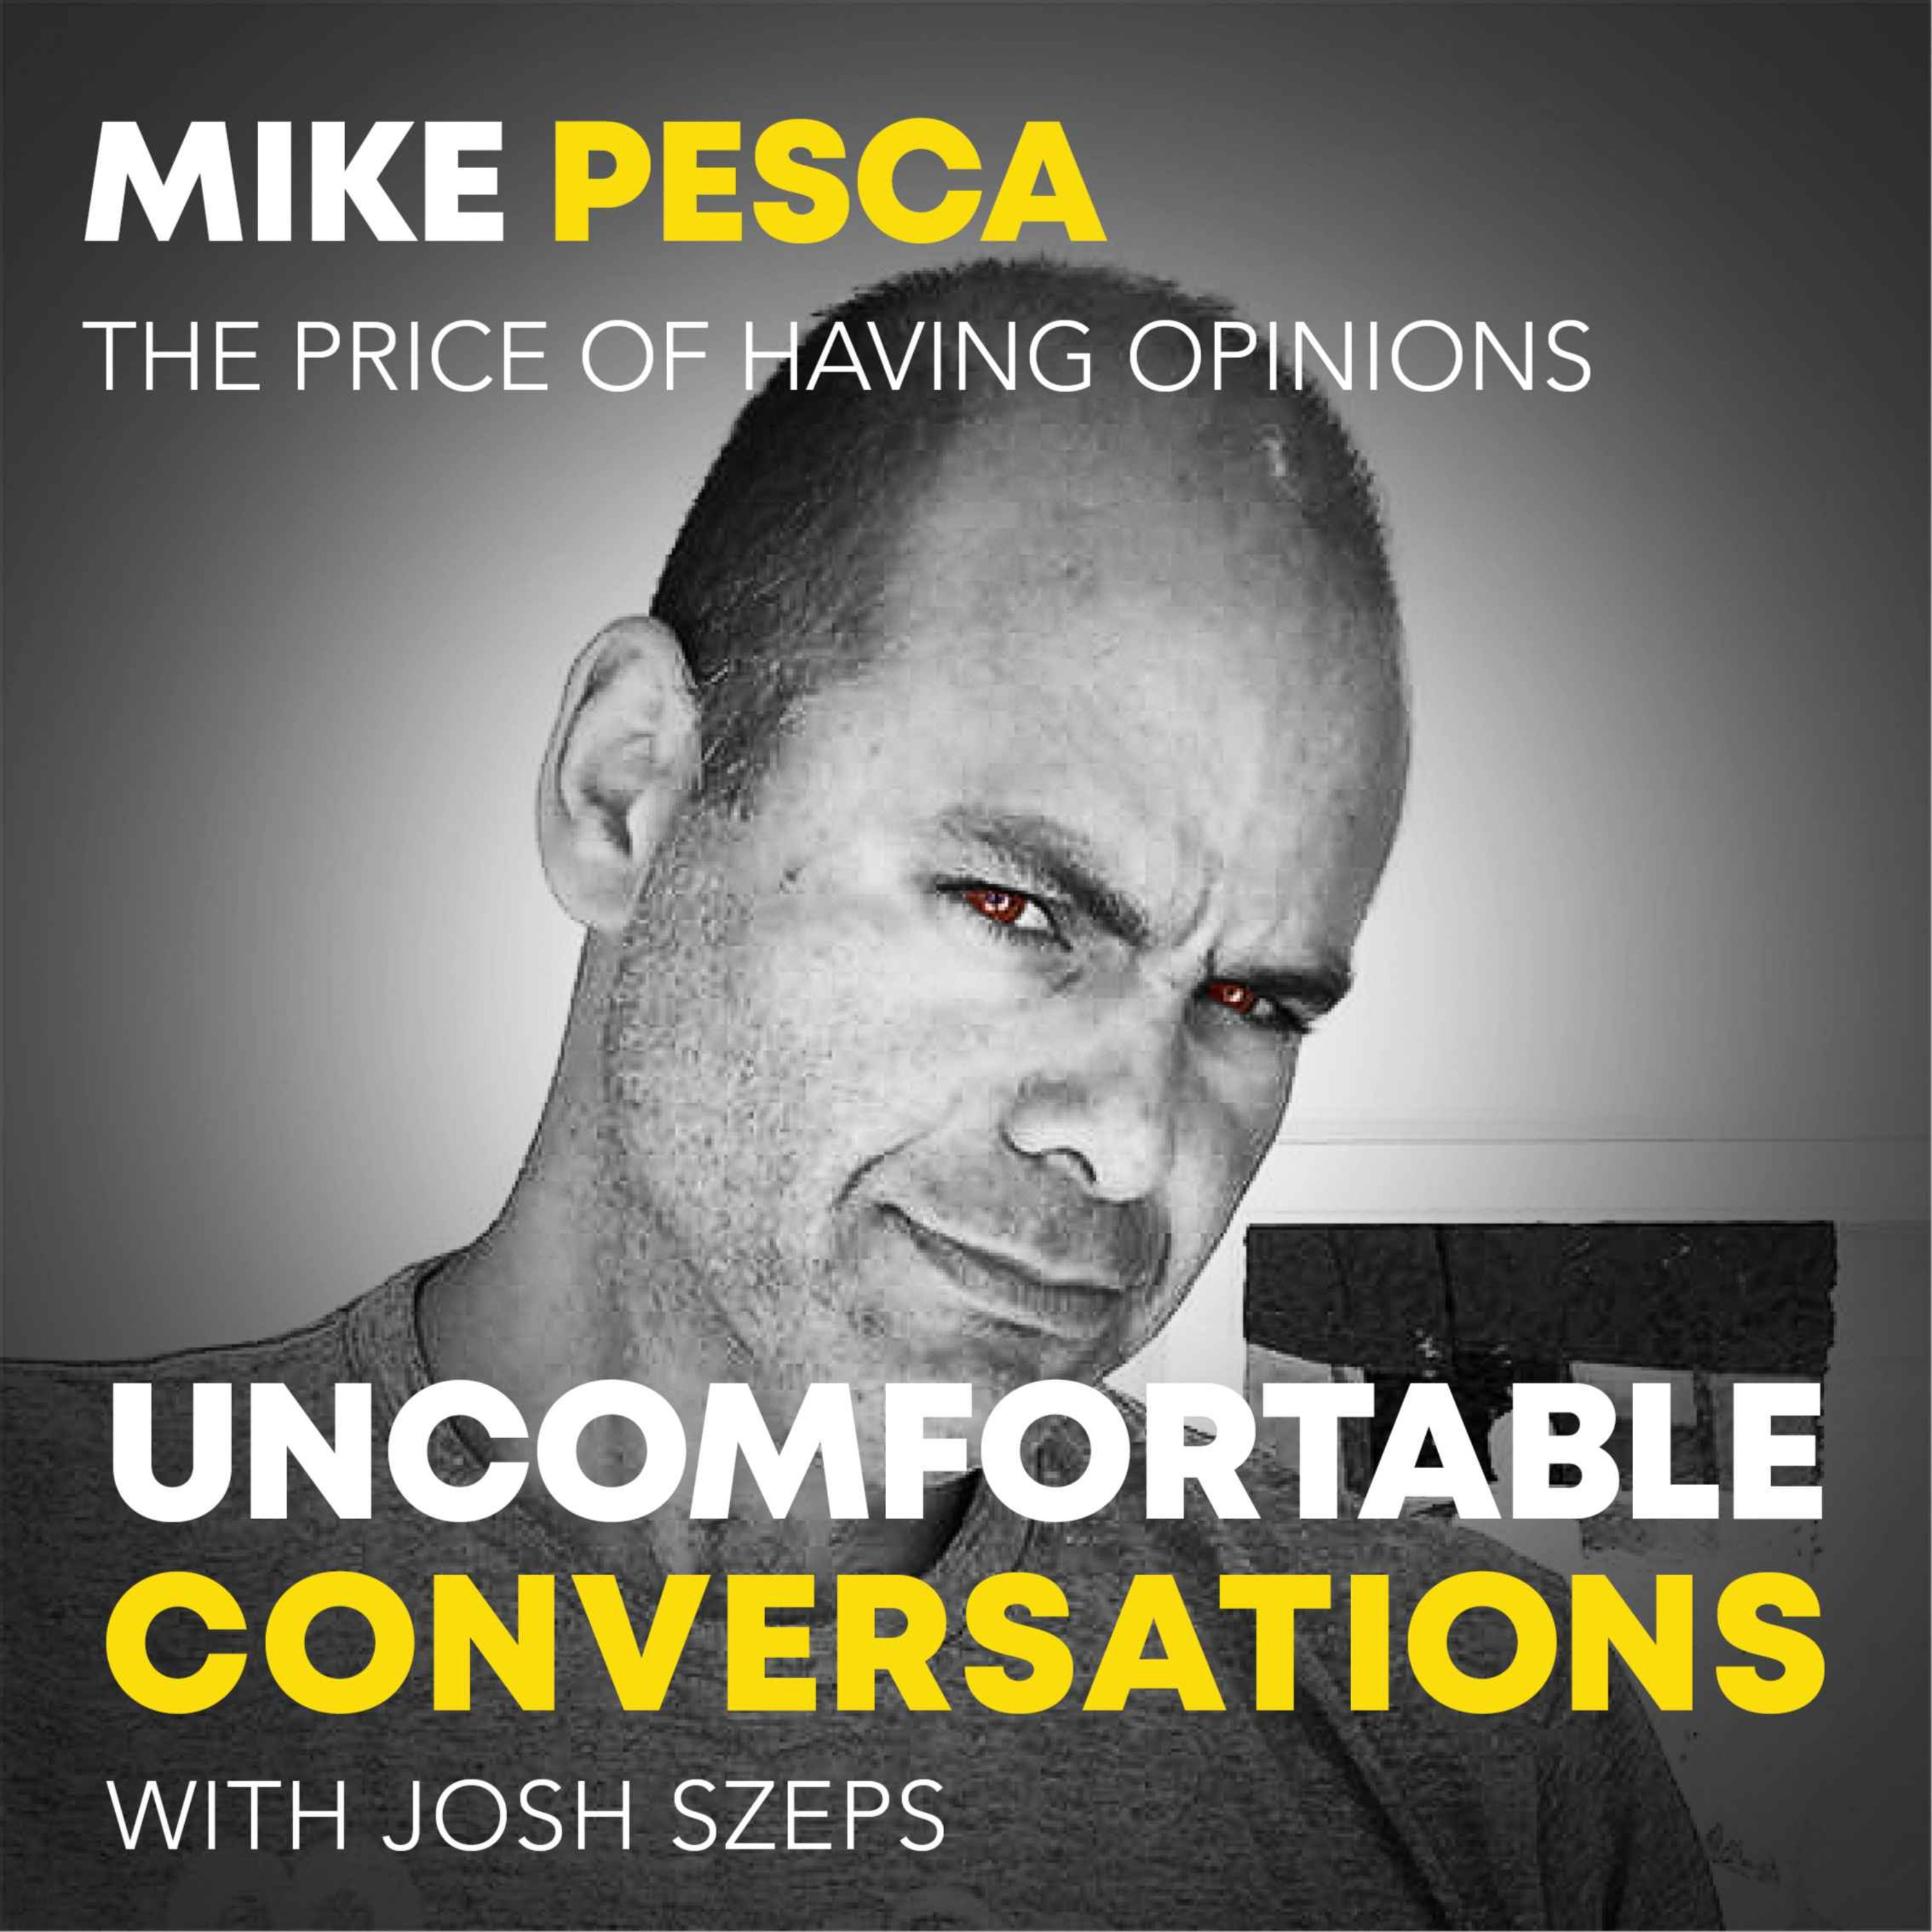 "The Price Of Having Opinions" with Mike Pesca